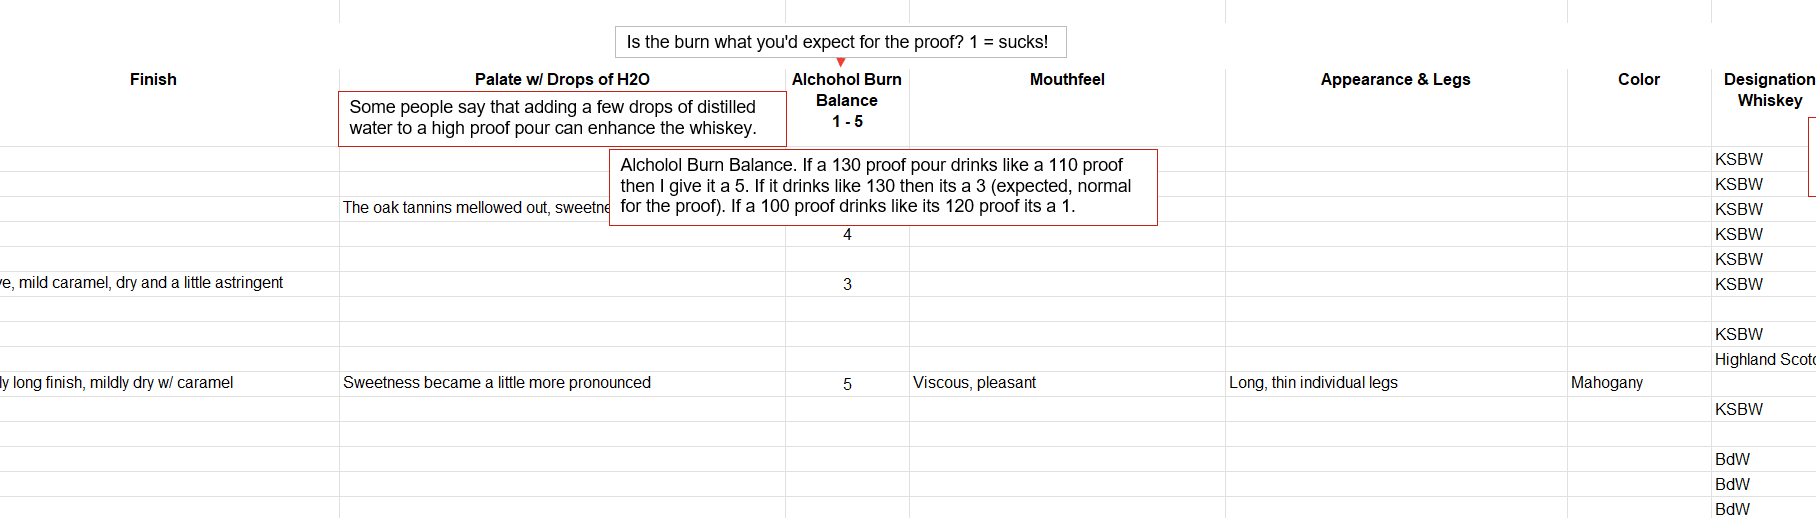 Bourbon Tasting Notes - finish, with water added, alcohol burn rating, mouthfeel